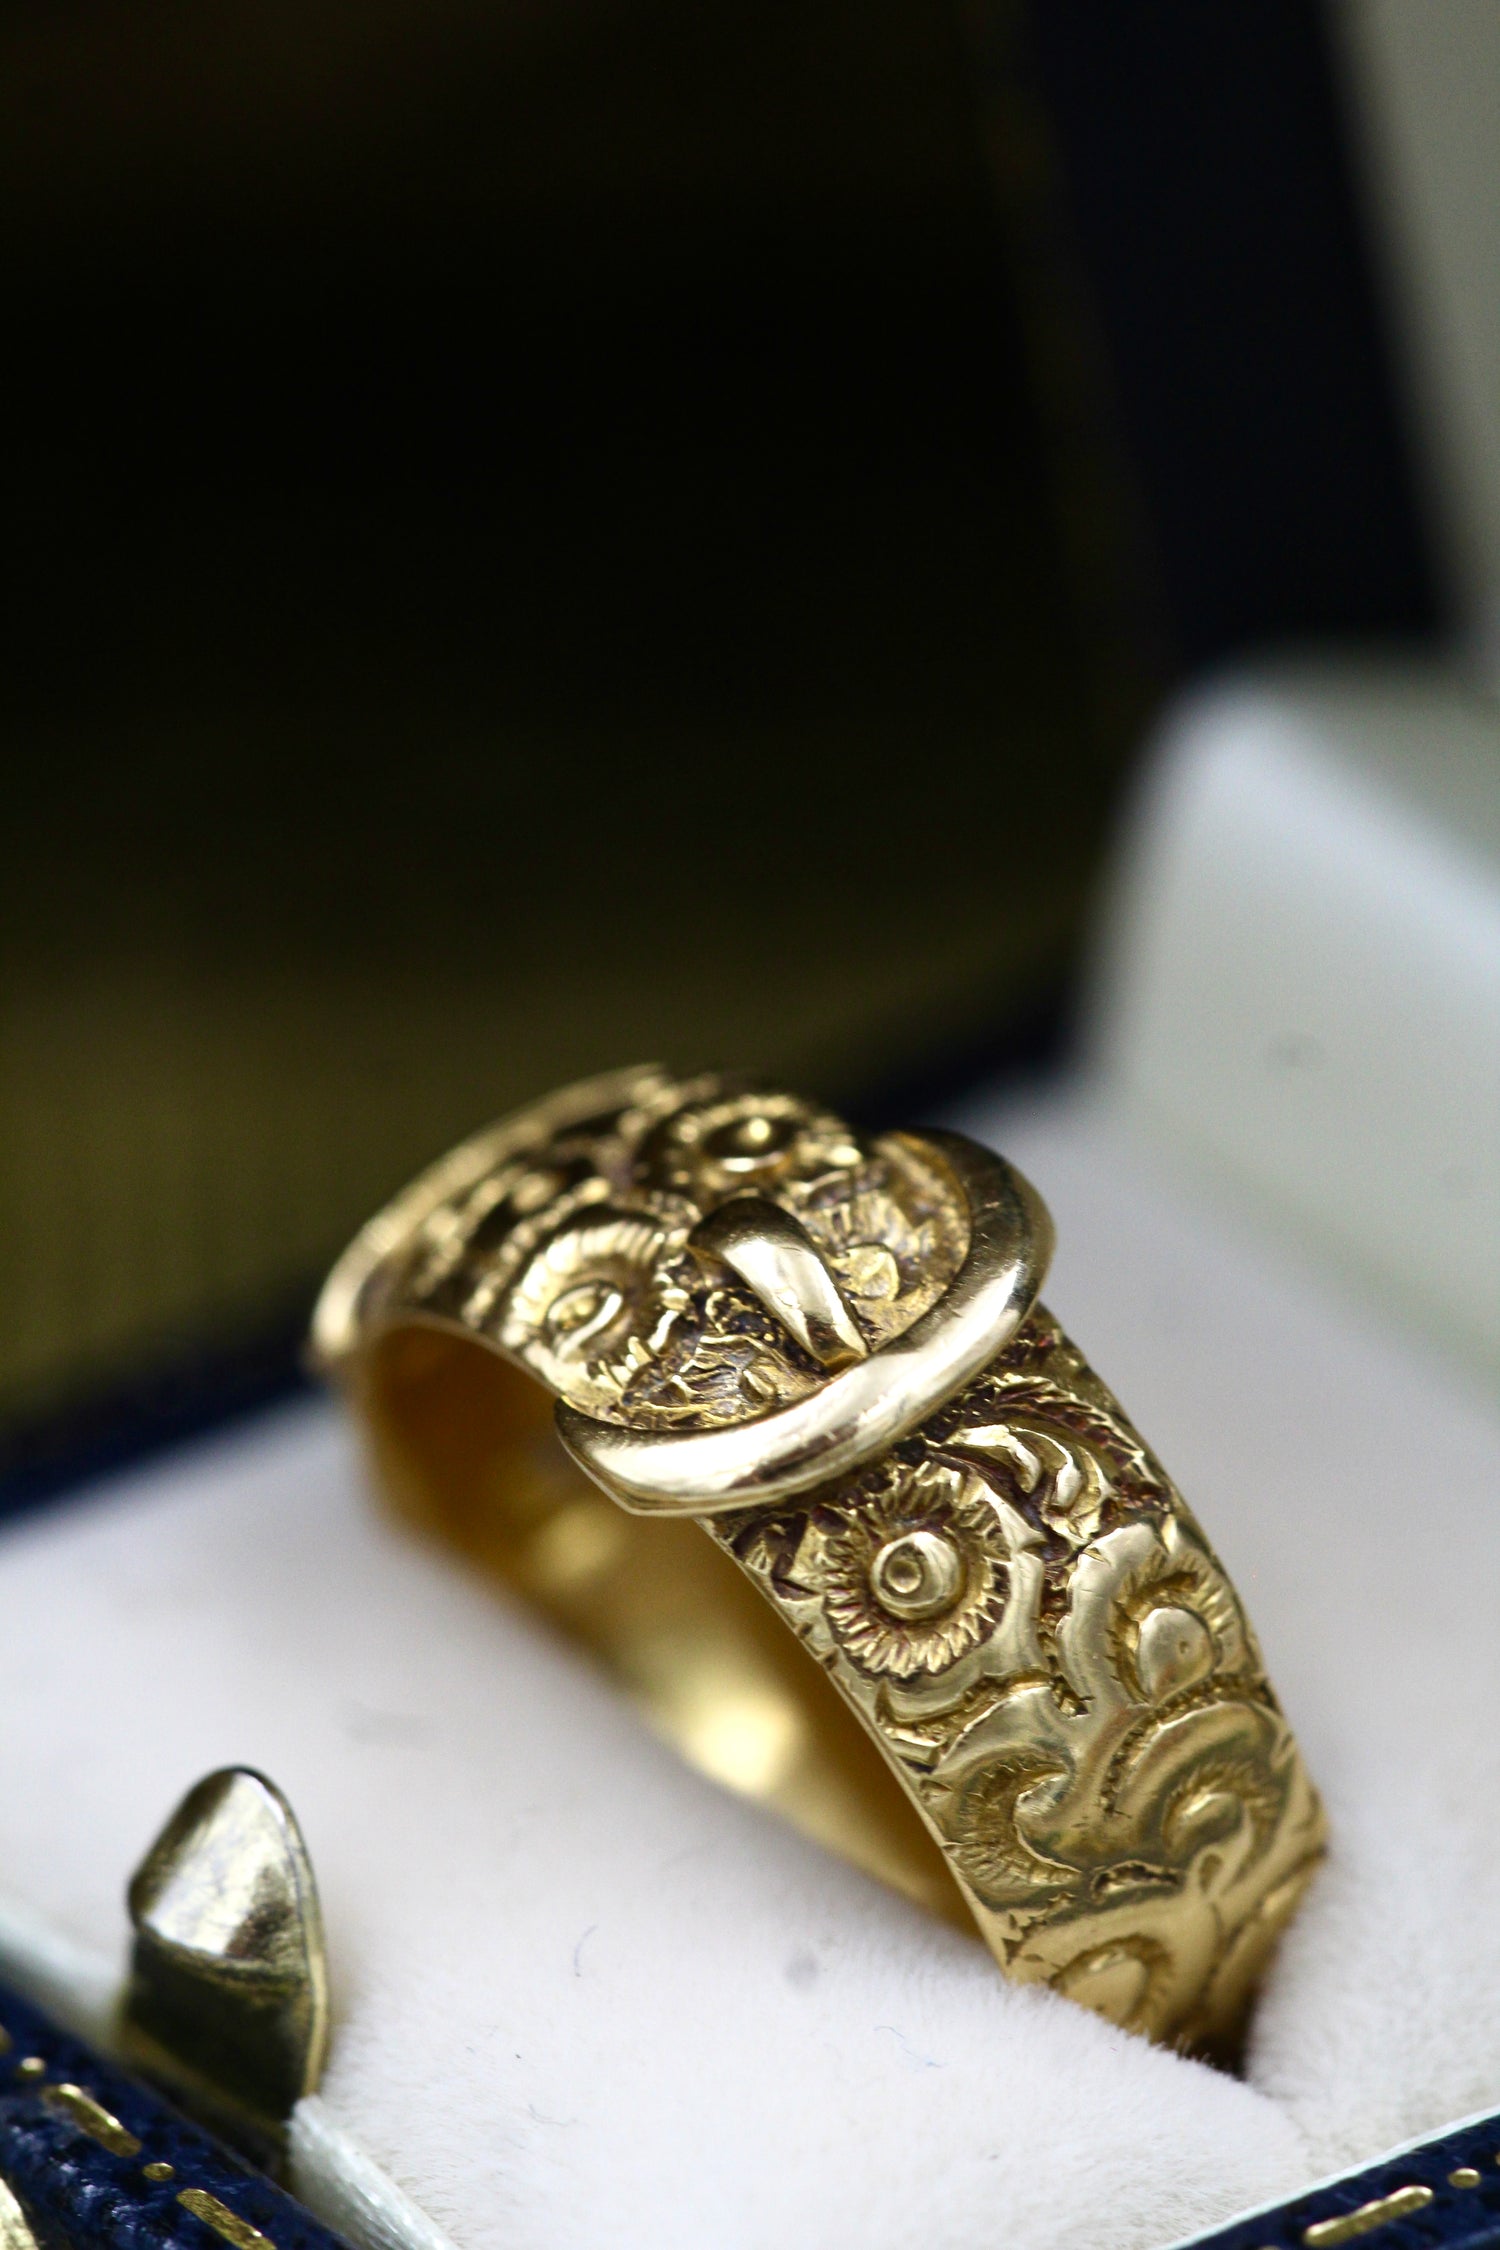 A very fine 18ct Yellow Gold Victorian Hand & Finely Engraved Belt Ring. Hallmarked London 1887 - Robin Haydock Antiques